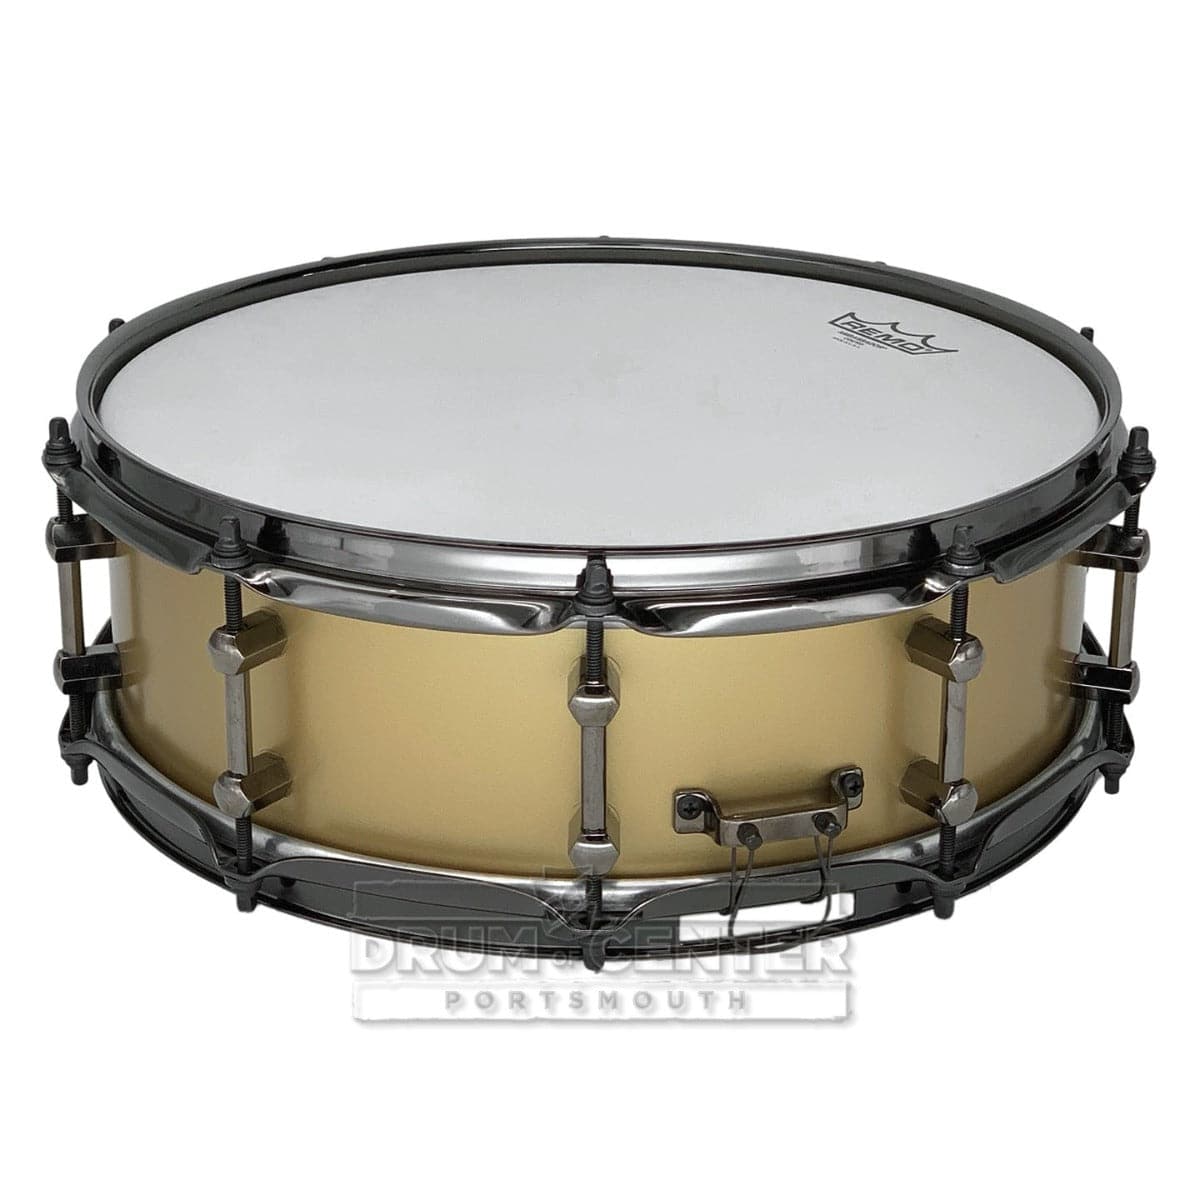 Noble & Cooley Alloy Classic Painted Snare Drum 14x4.75 Flat Gold w/Black Hw